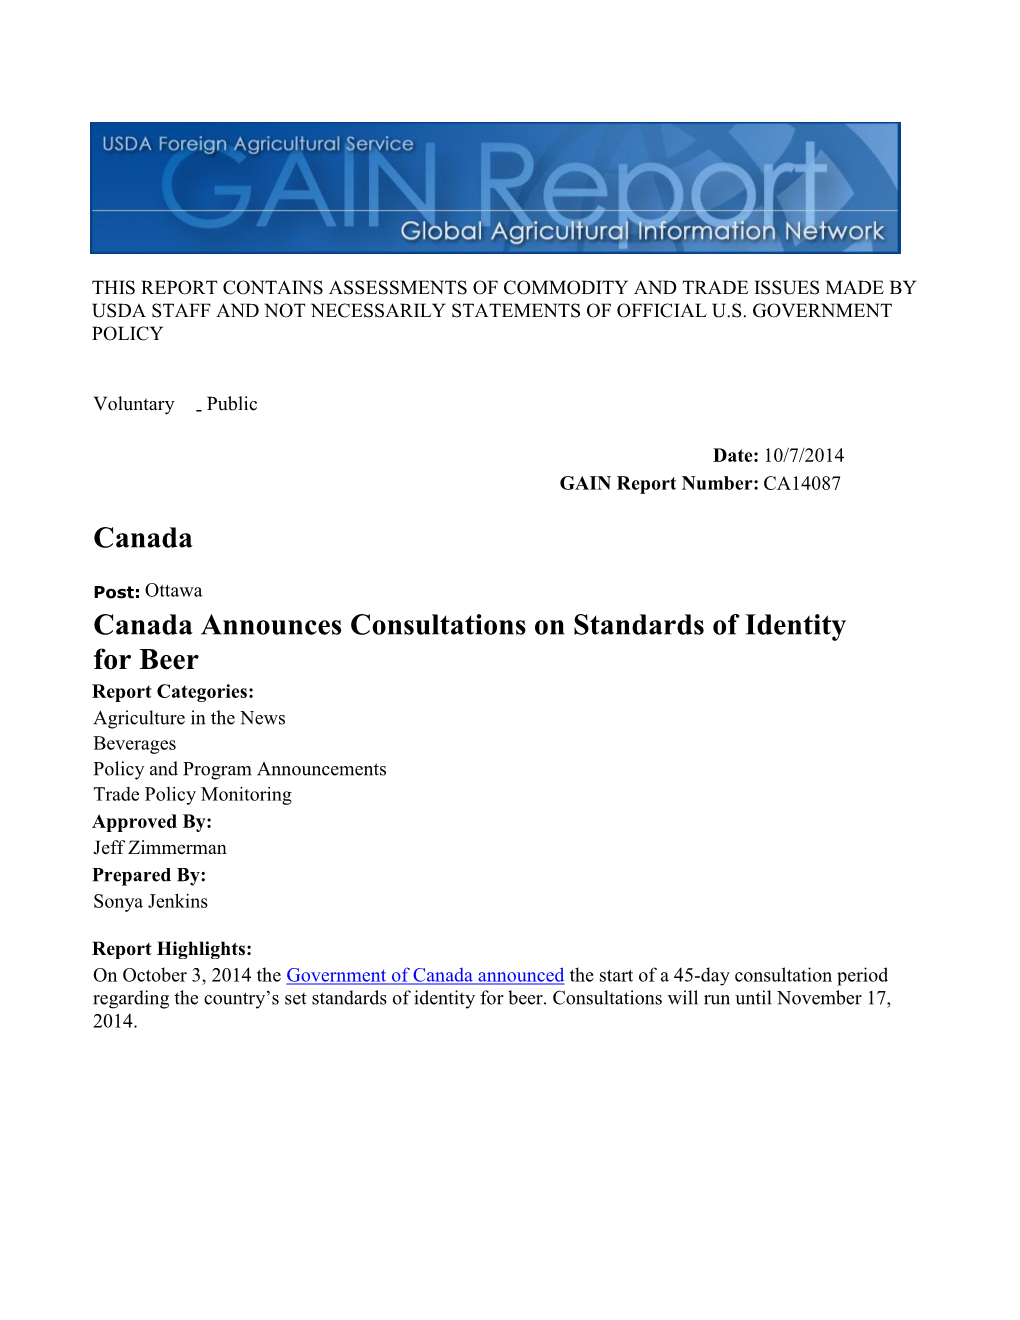 Canada Announces Consultations on Standards of Identity for Beer